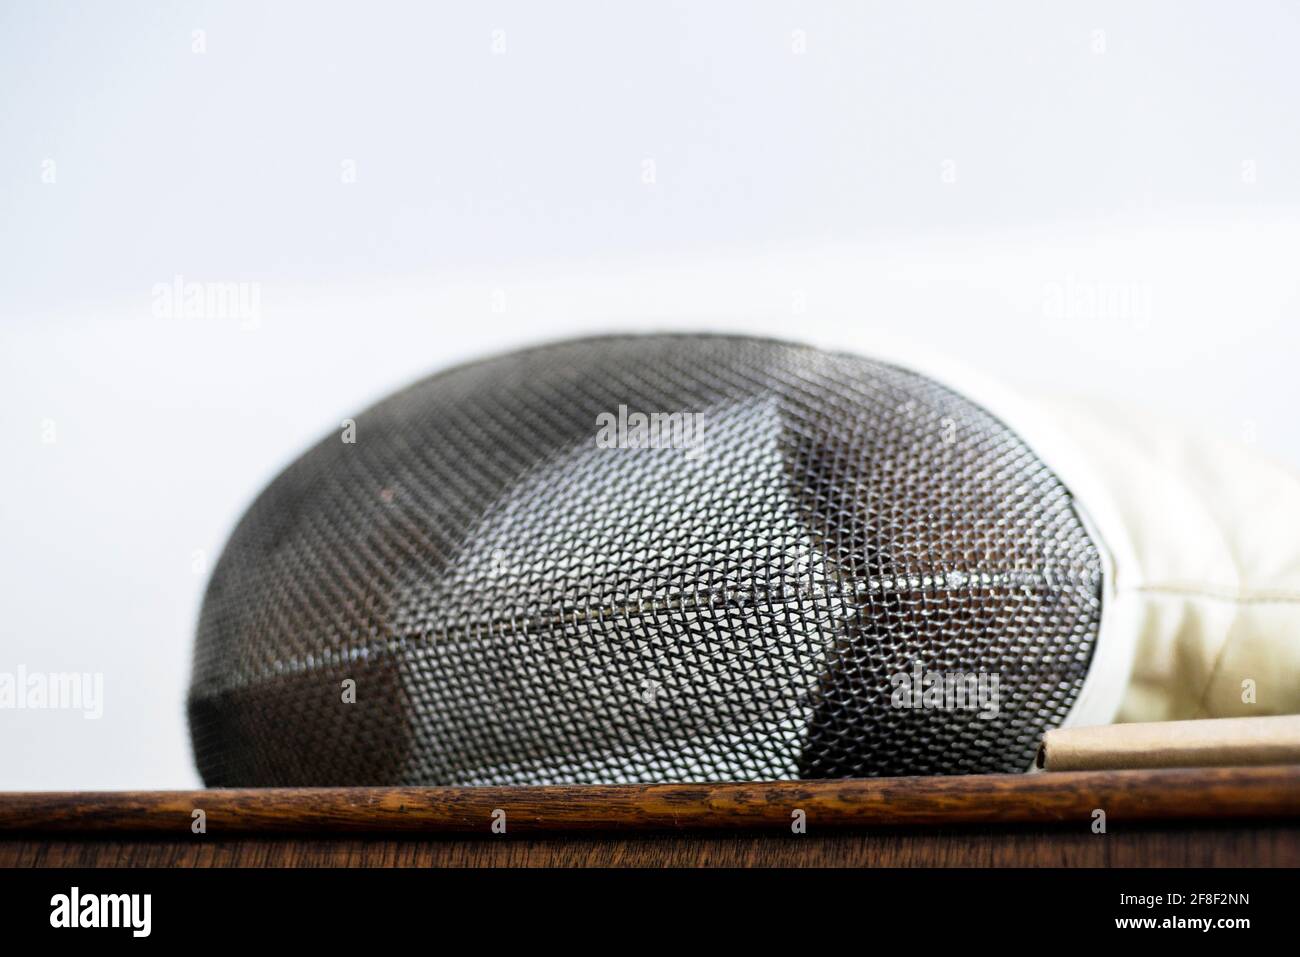 Fencing mask Stock Photo